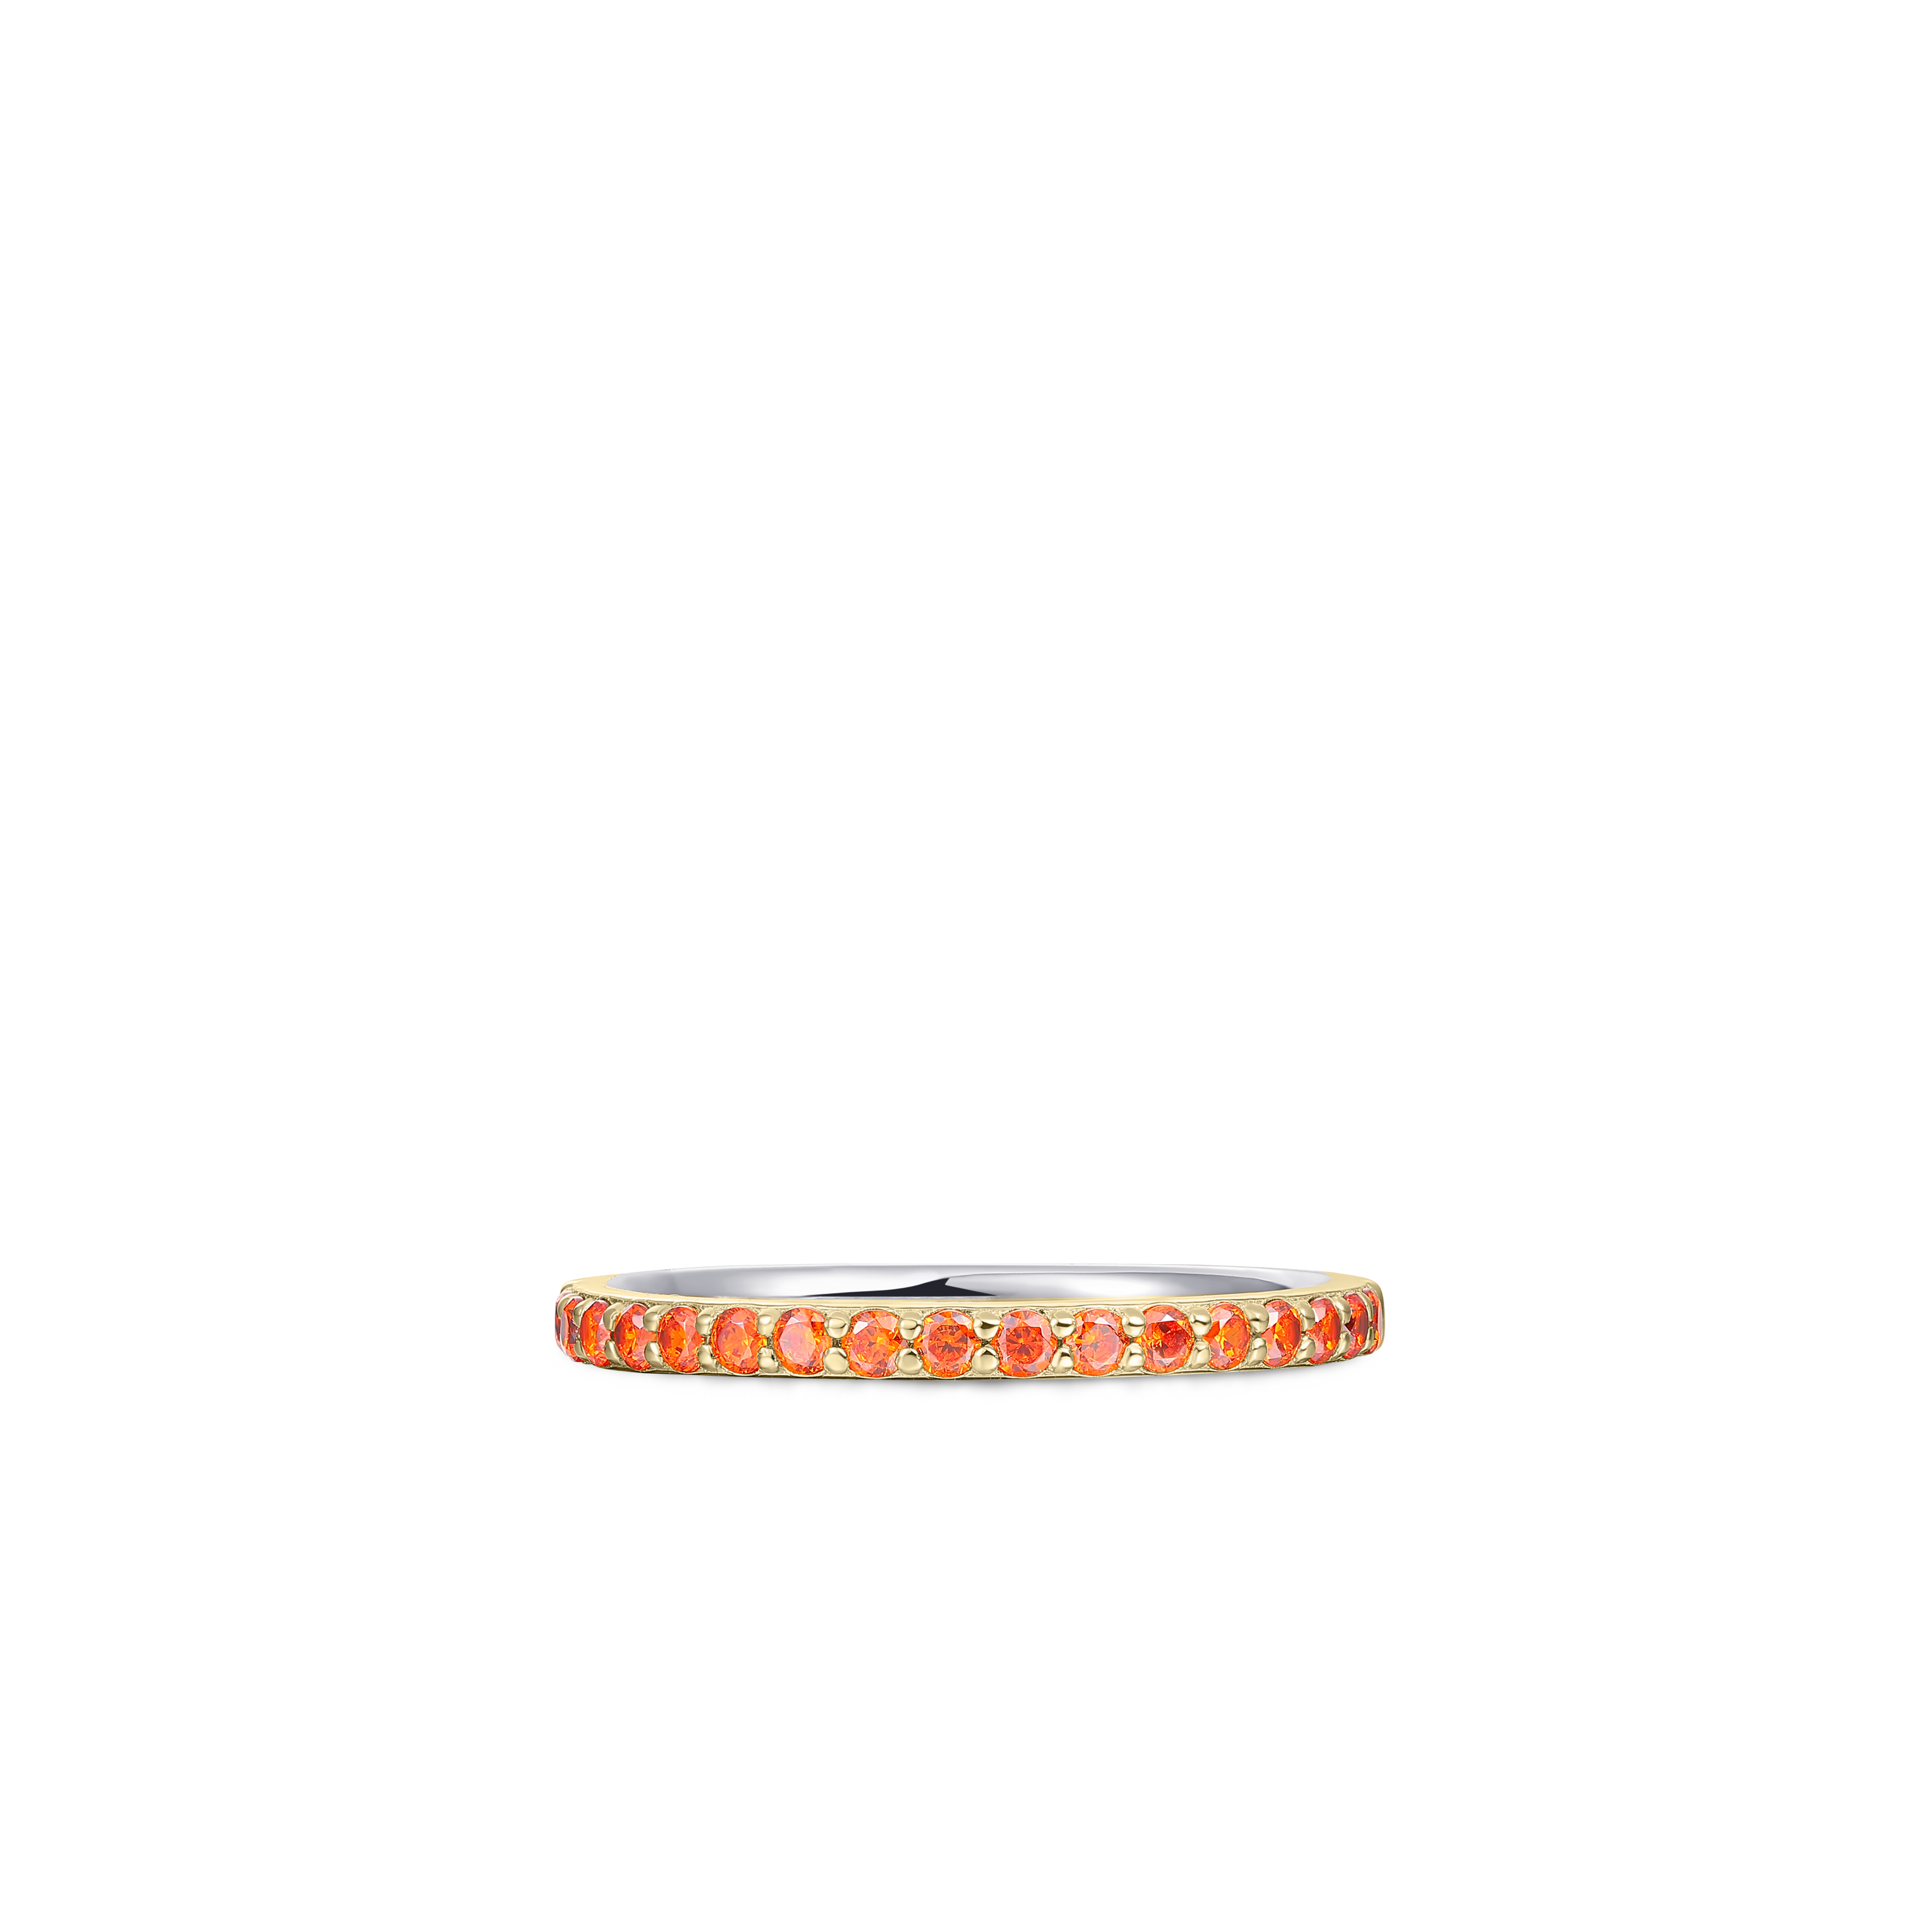 Orange Pave Stackable Ring | Silver Gold Plated | Gisser Jewels  